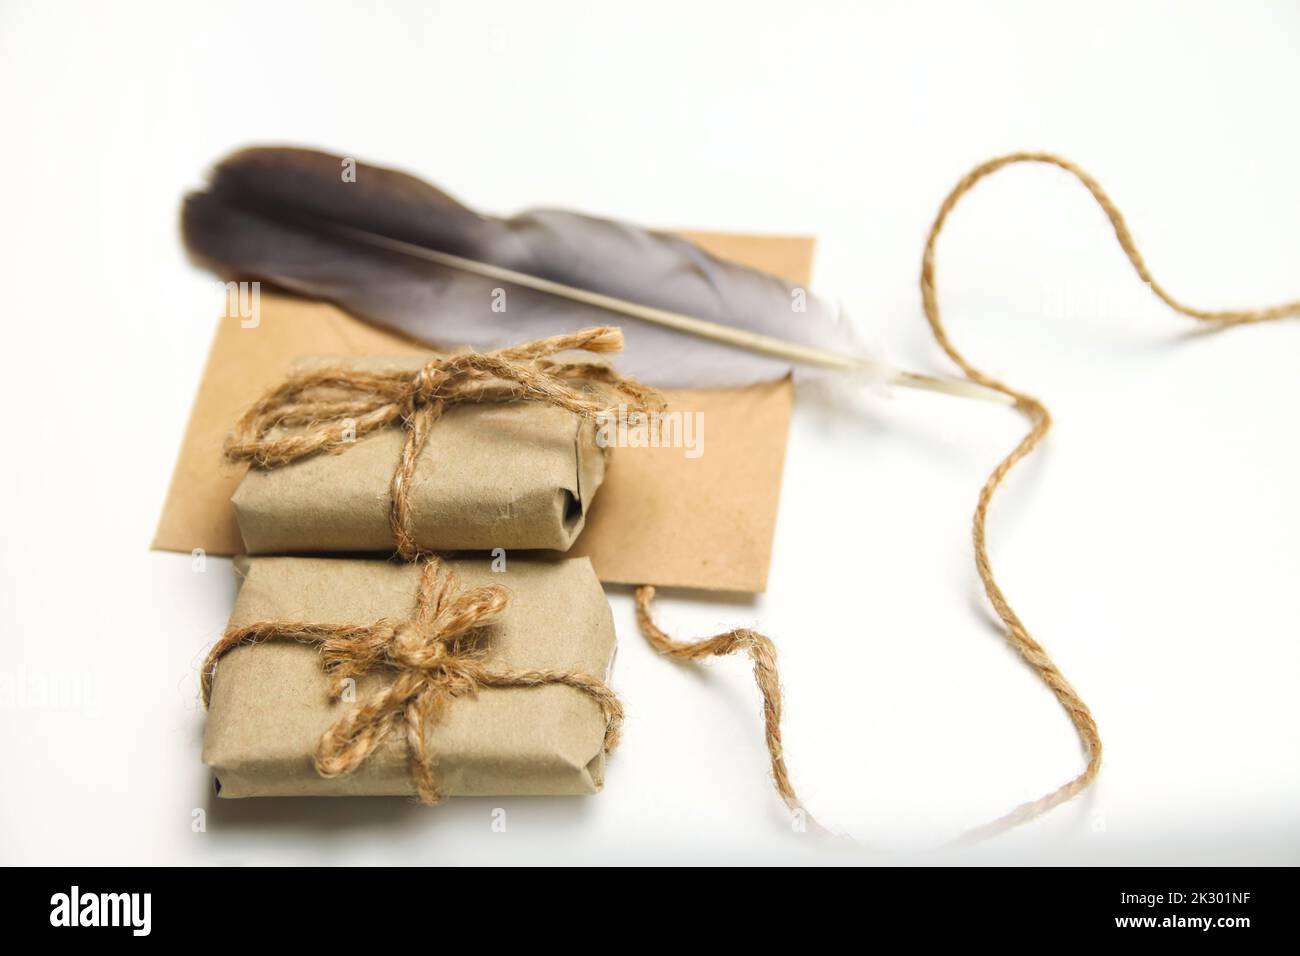 Defocus craft eco rope and envelope, feather pen on white background. Christmas holiday concept. Letter to Santa Claus. Wish list. Old quill pen. Retr Stock Photo